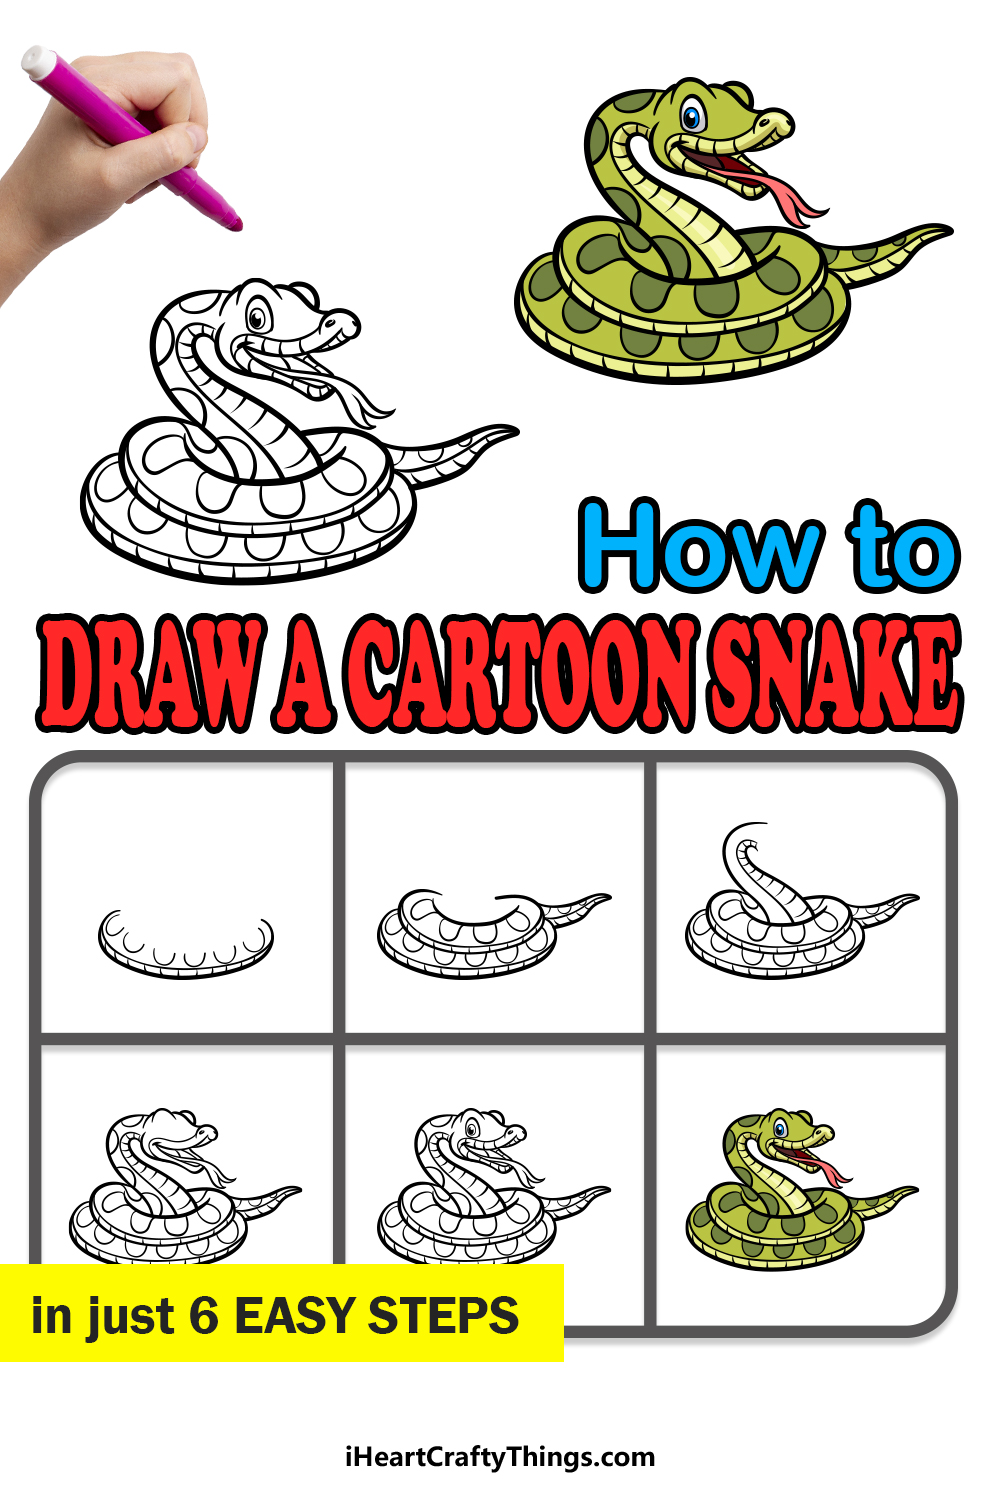 how to draw a cartoon snake in 6 easy steps